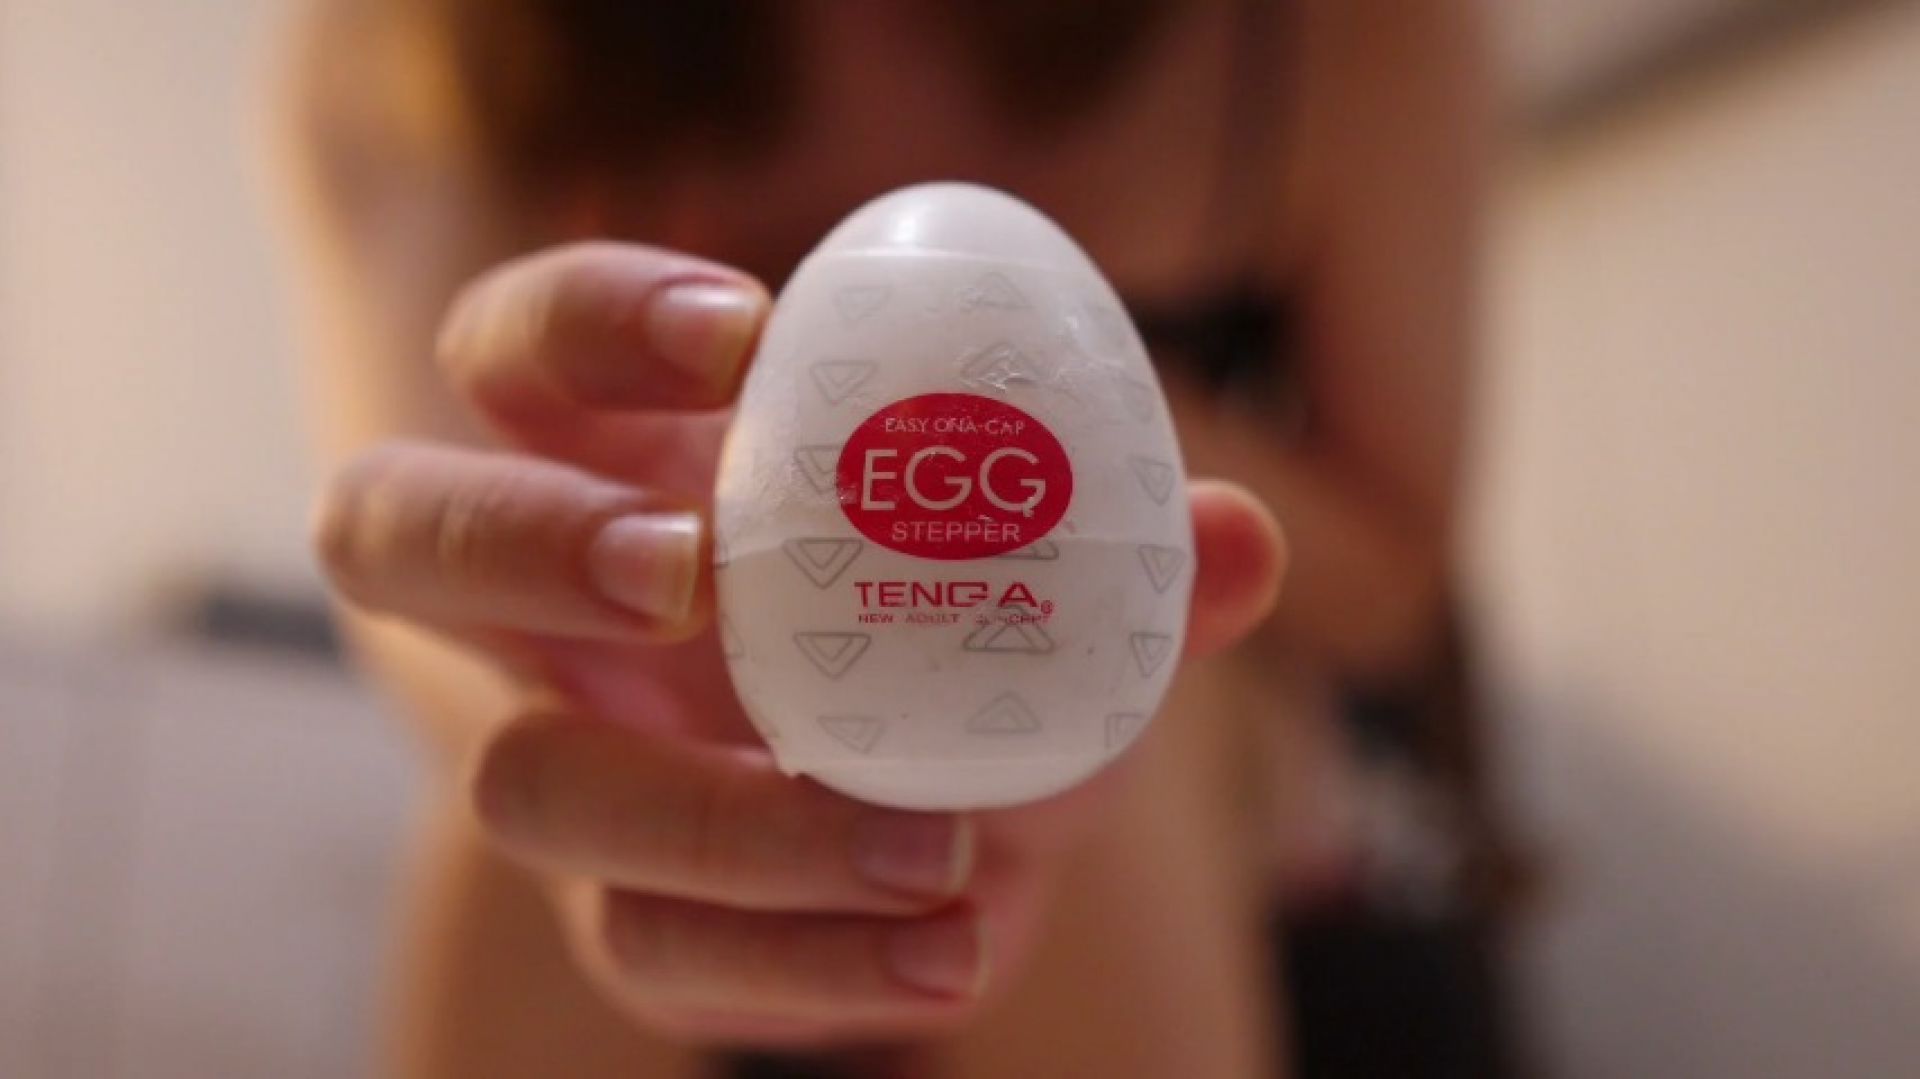 Trying out an egg masturbator